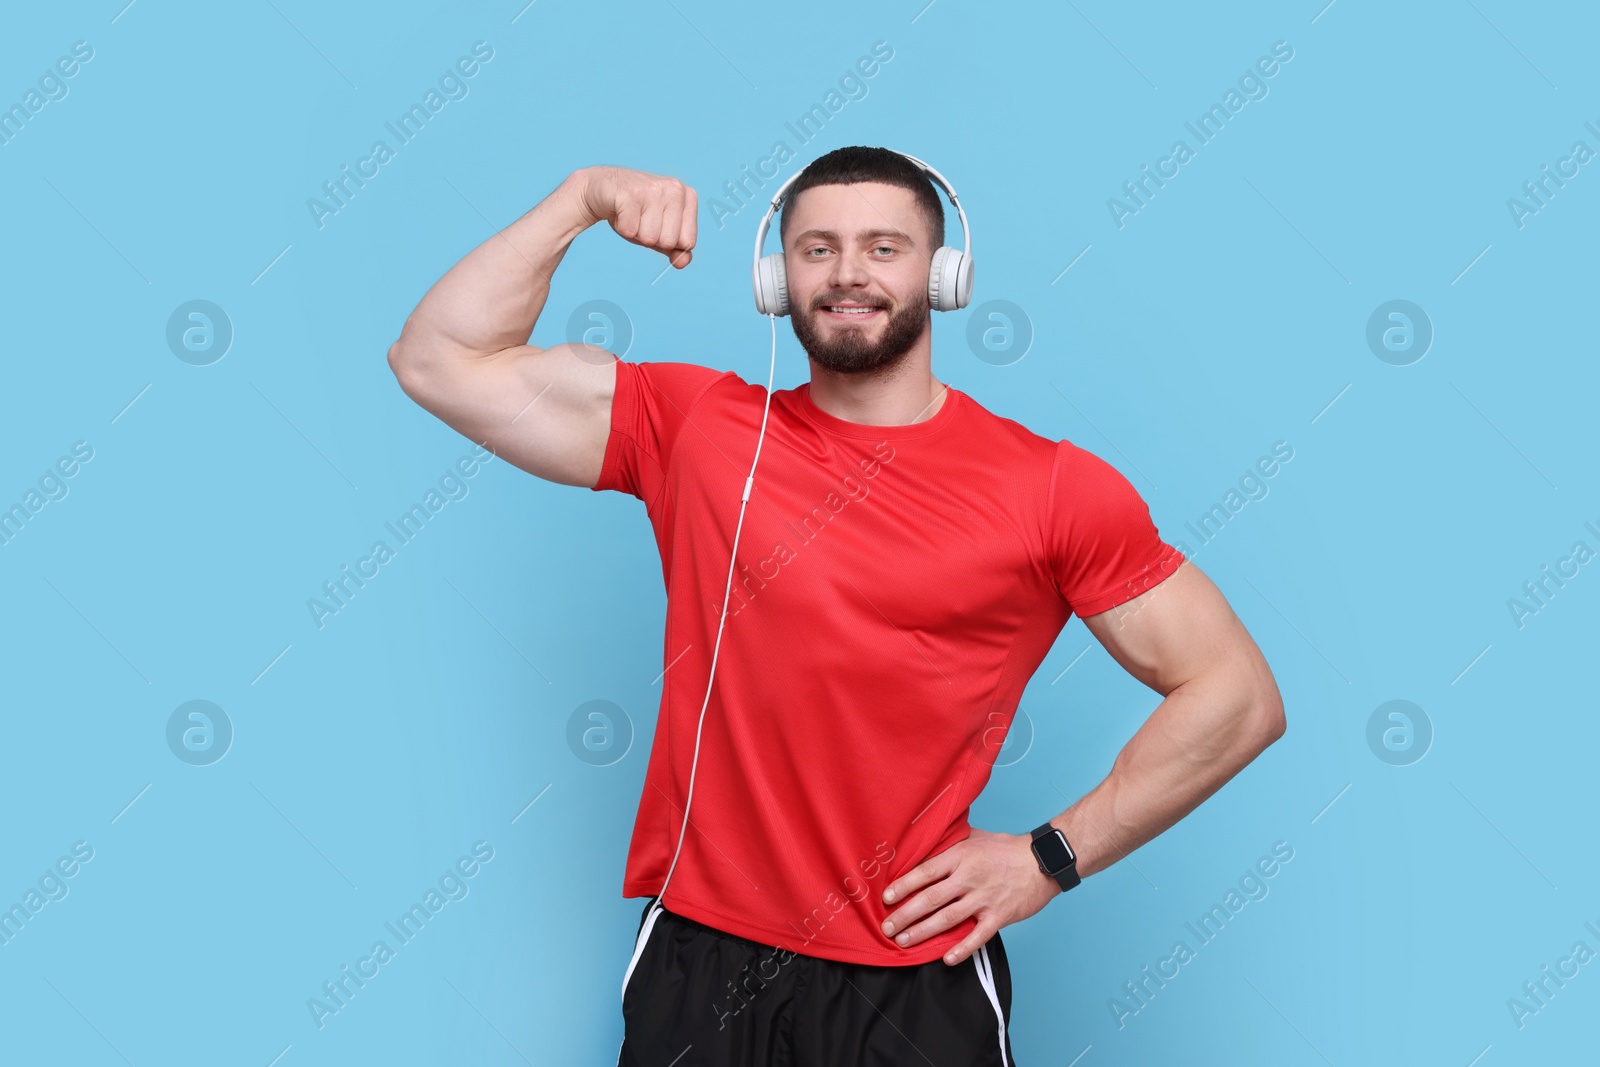 Photo of Handsome man with headphones showing muscles on light blue background